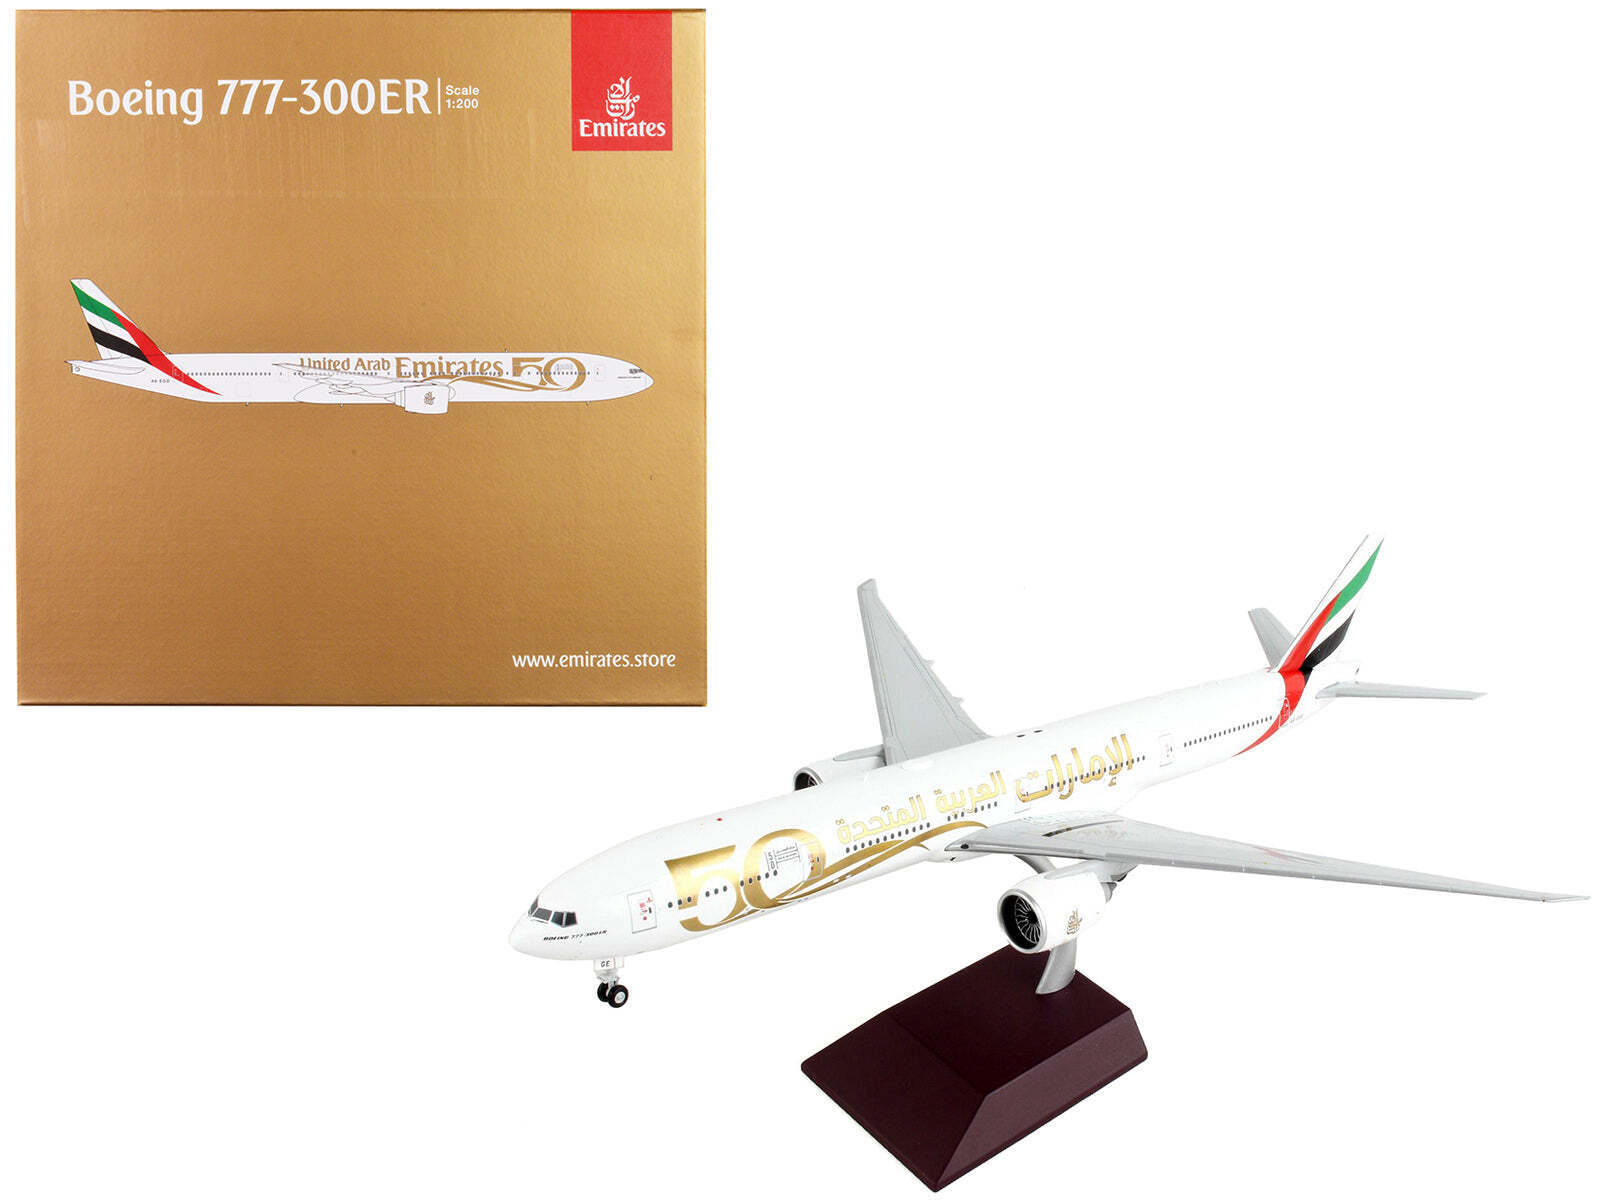 Boeing 777-300ER Commercial Emirates Airlines - 1/200 Diecast Model Airplane